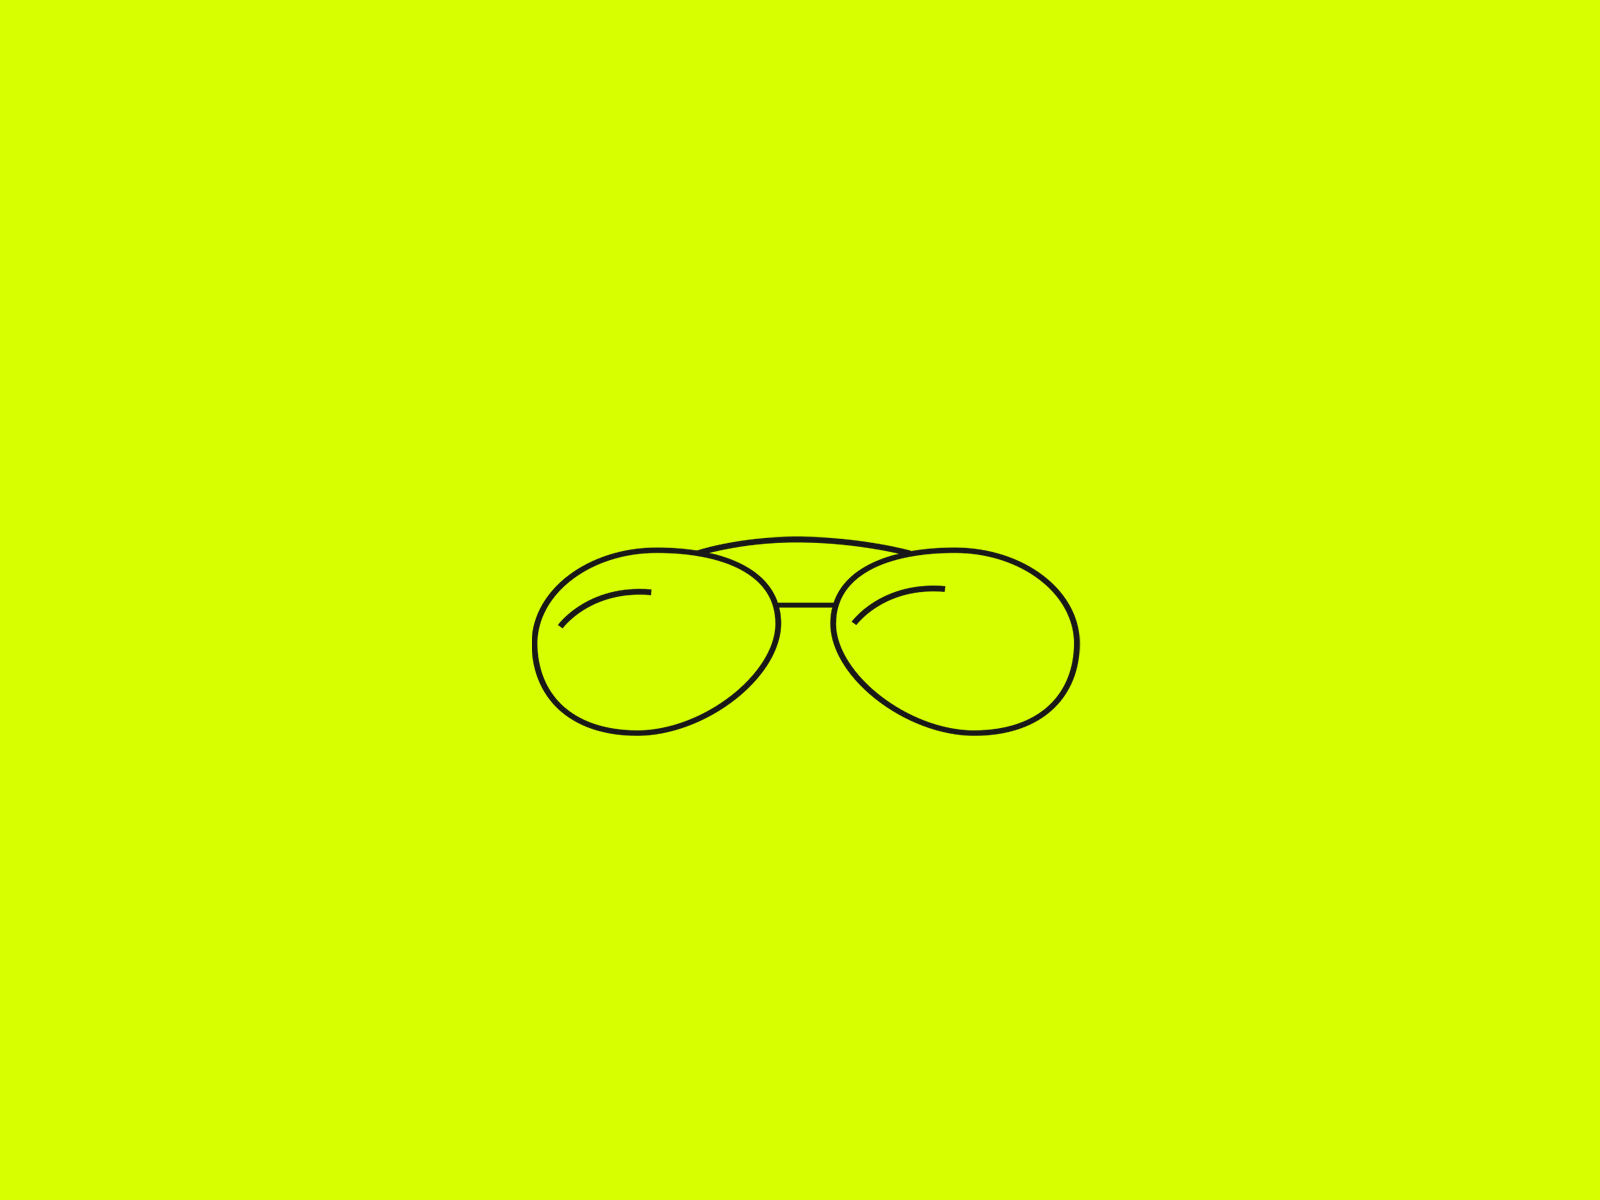 morphing glases animation